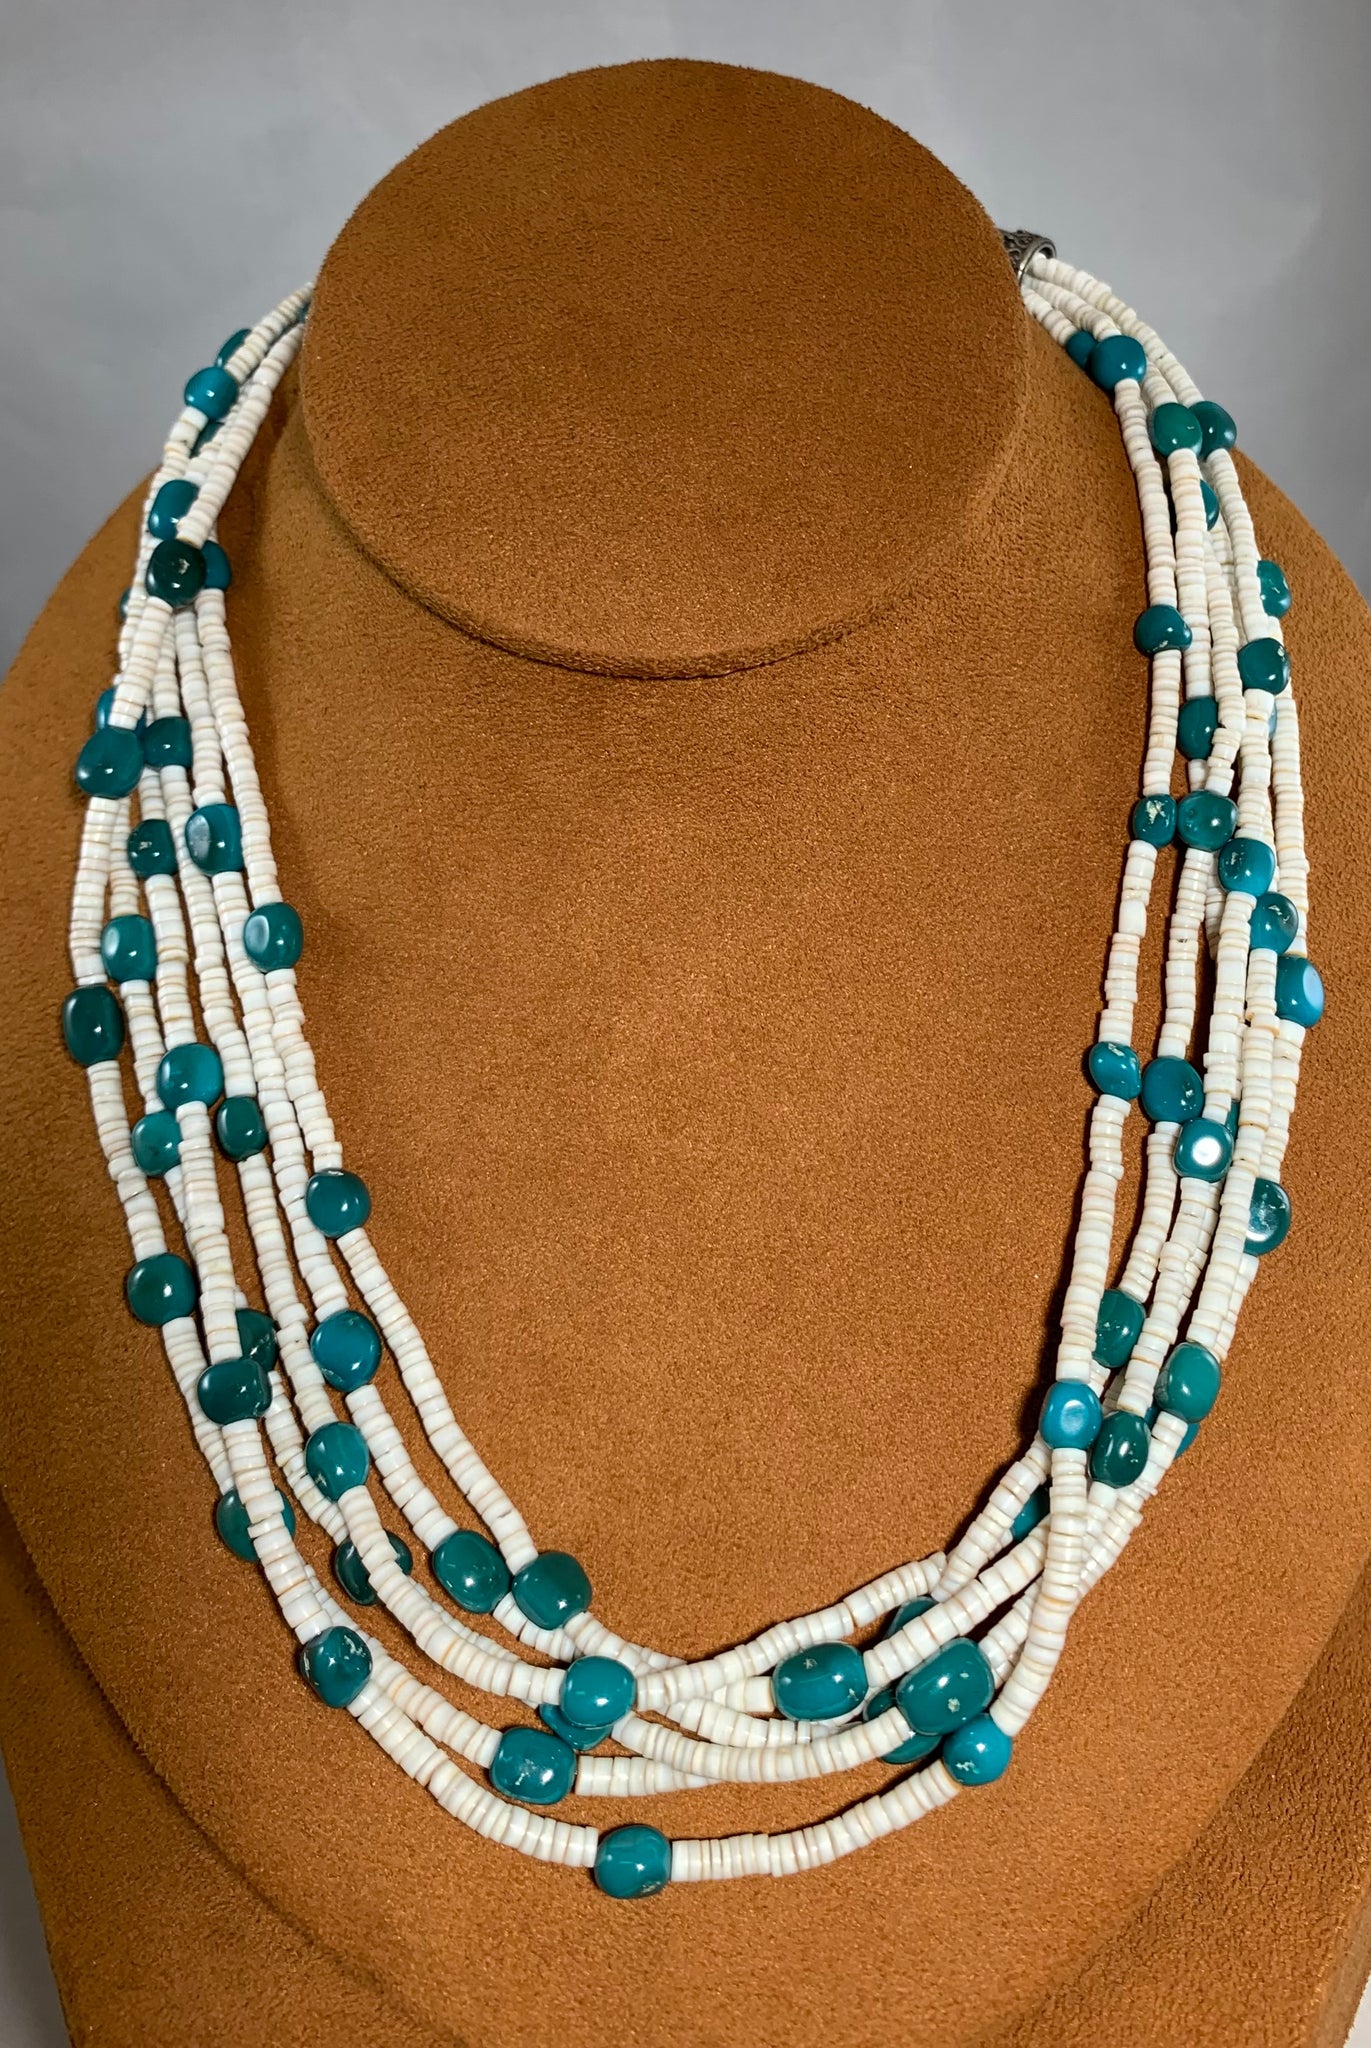 Shell and Turquoise Necklace by Don Lucas